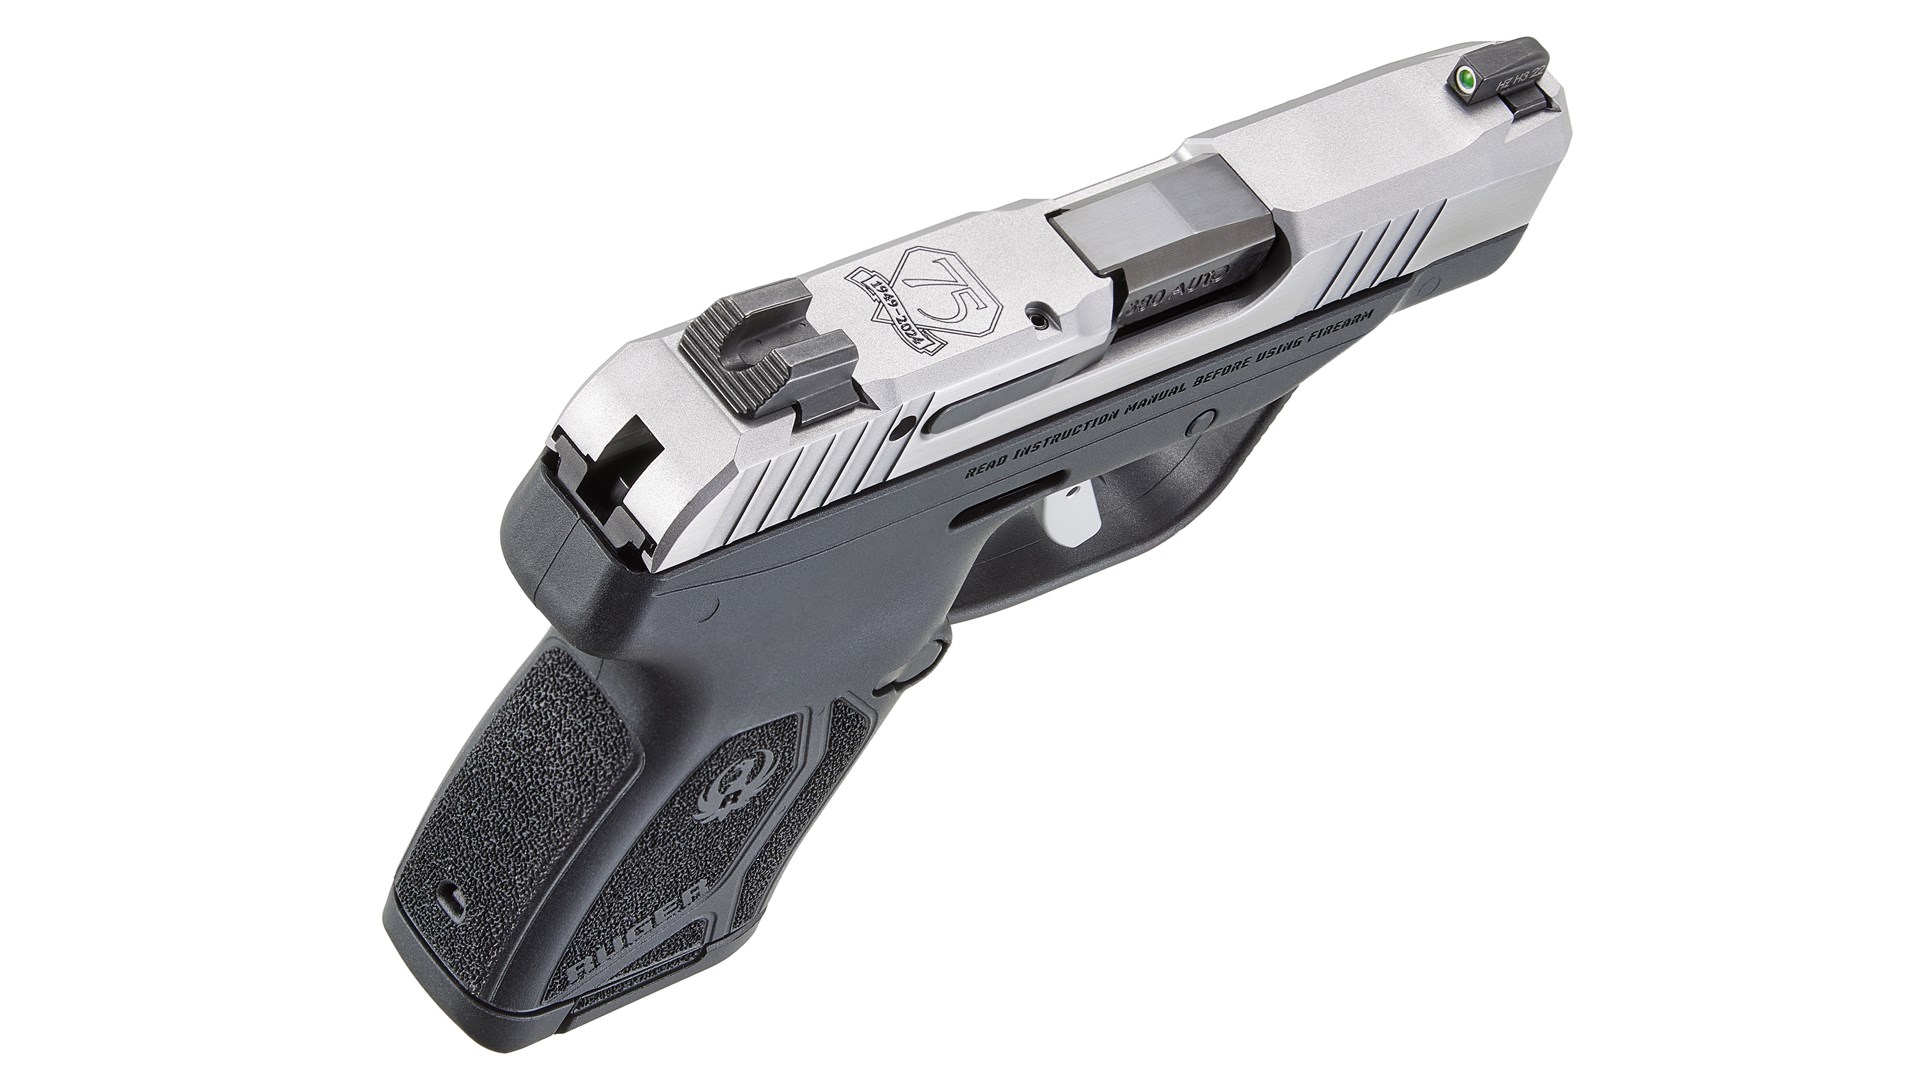 Top face of the Ruger 75th Anniversary LCP-MAX Commemorative pistol.